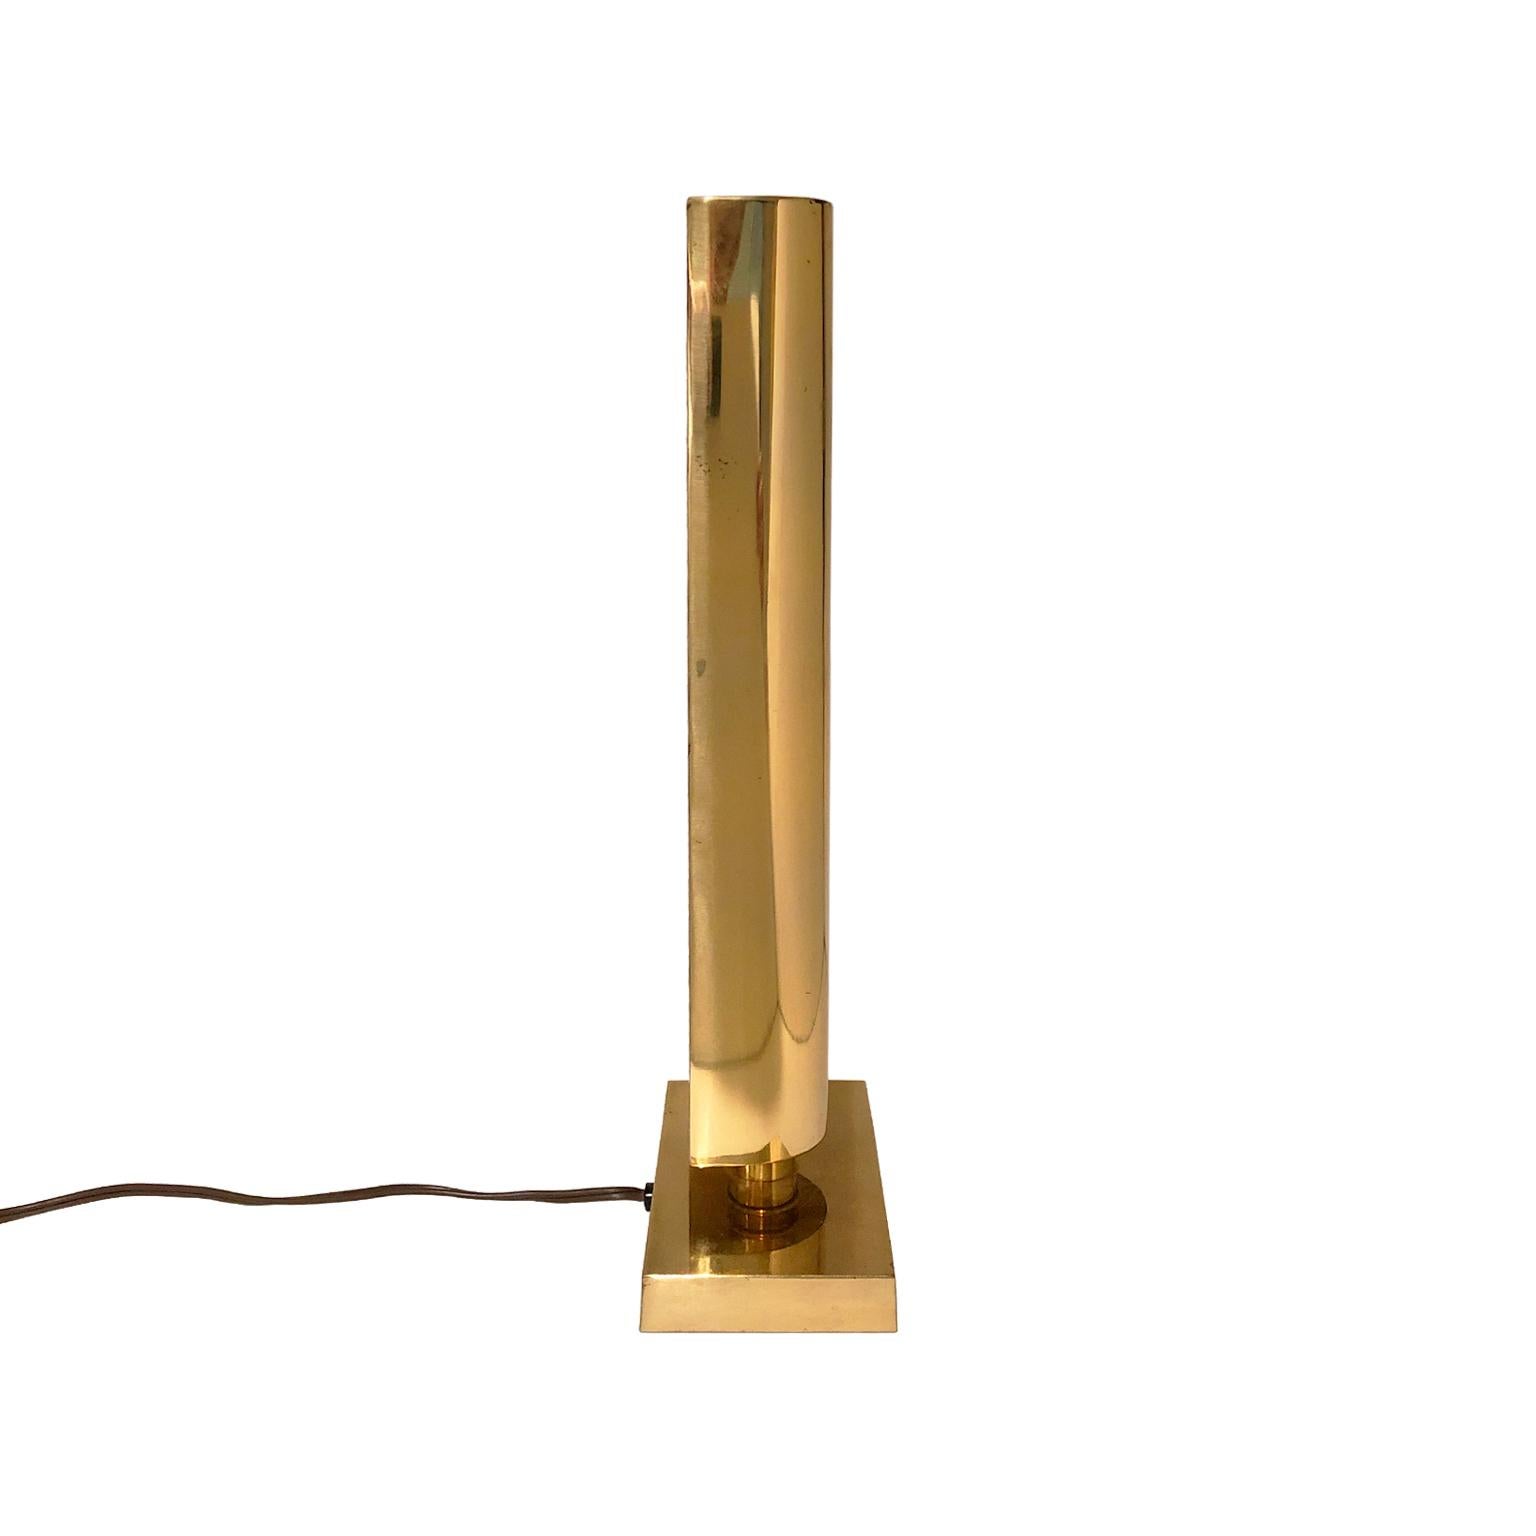 Brass Chapman table sconce, USA, 1970s.